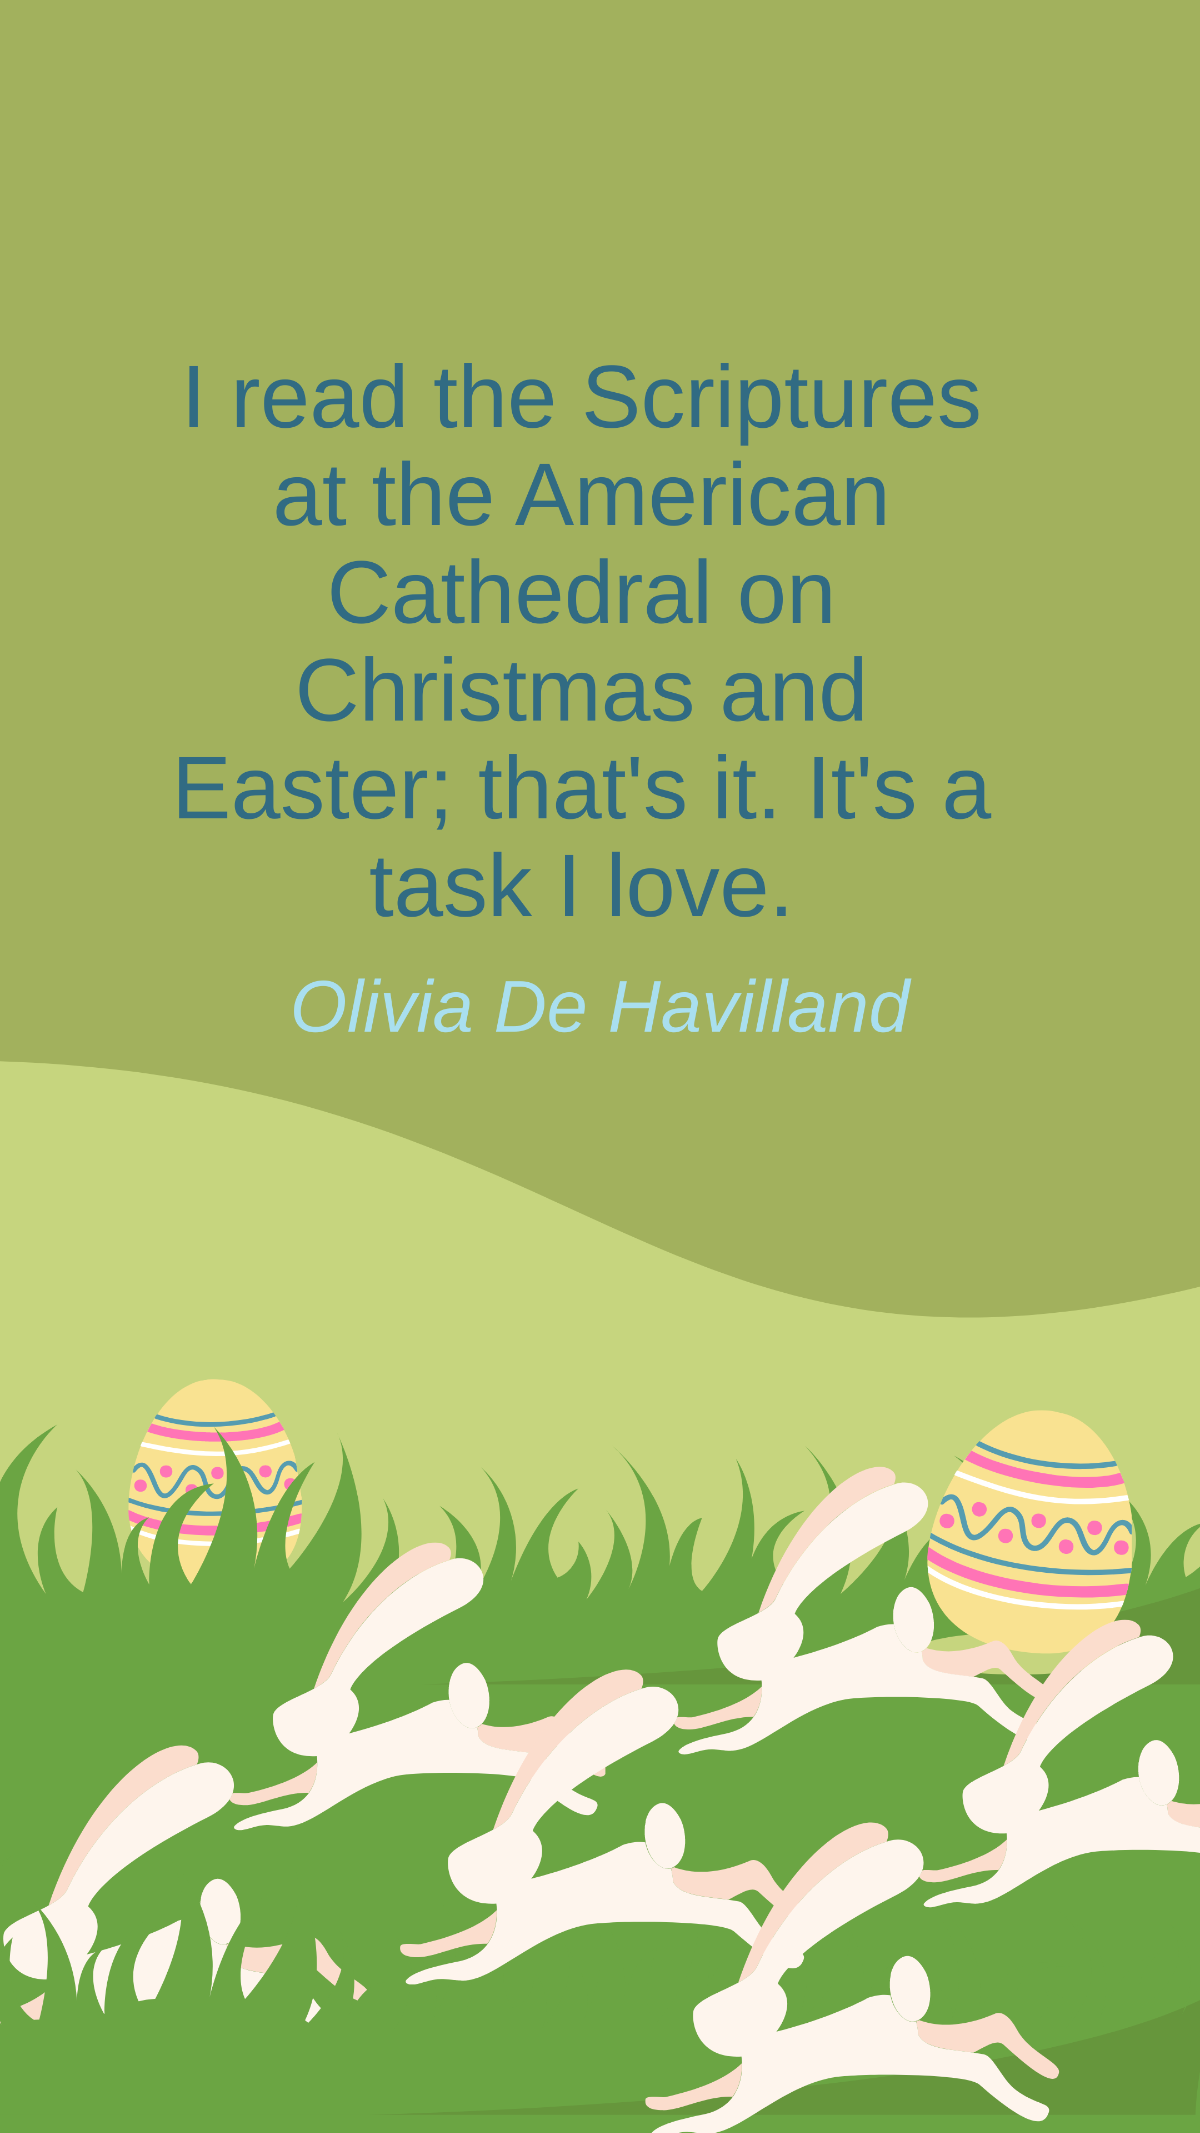 Olivia De Havilland - I read the Scriptures at the American Cathedral on Christmas and Easter; that's it. It's a task I love. Template